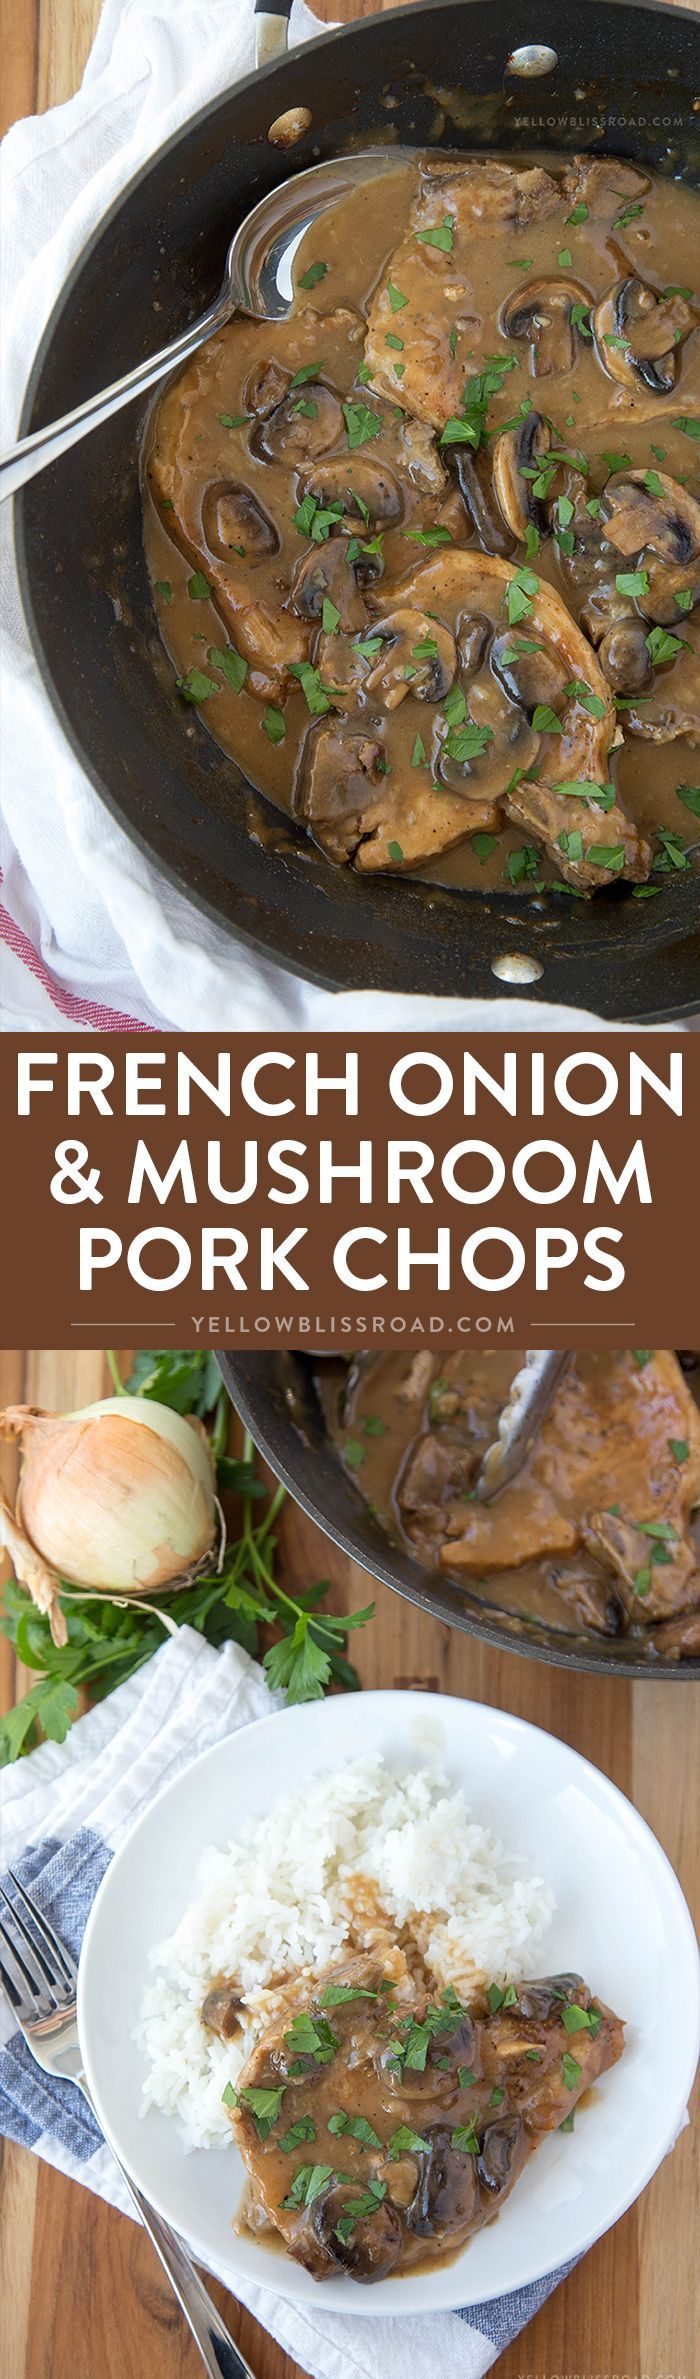 French Onion and Mushroom Pork Chops with Gravy – An easy weeknight dinner with just 4 ingredients.